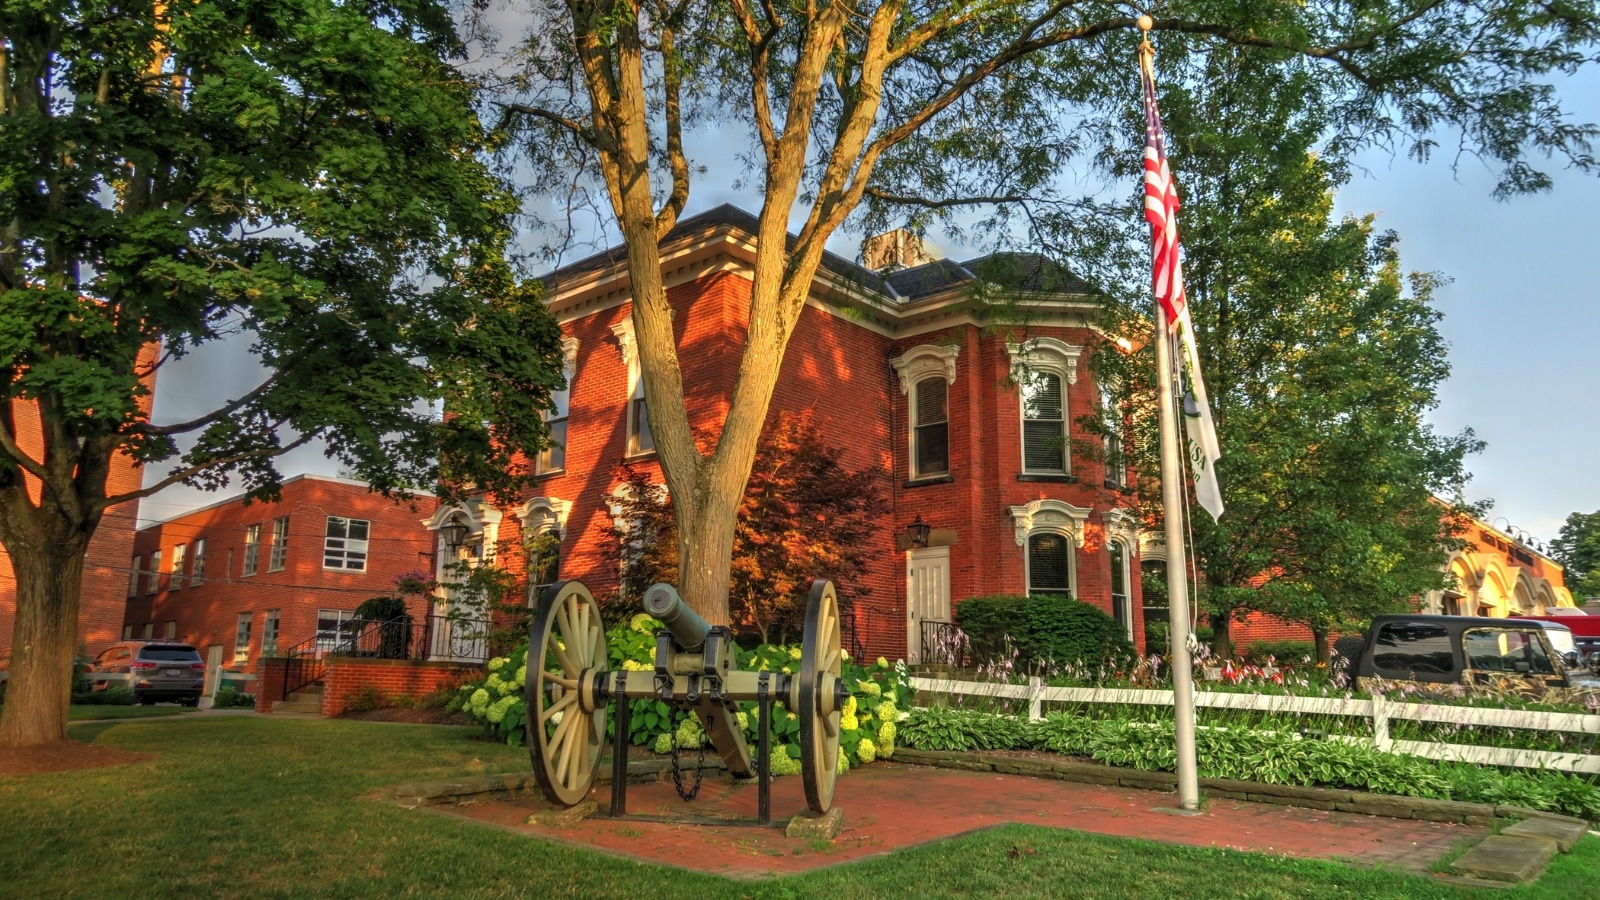 15 Best Small Towns in Ohio: A Guide to Charming Destinations